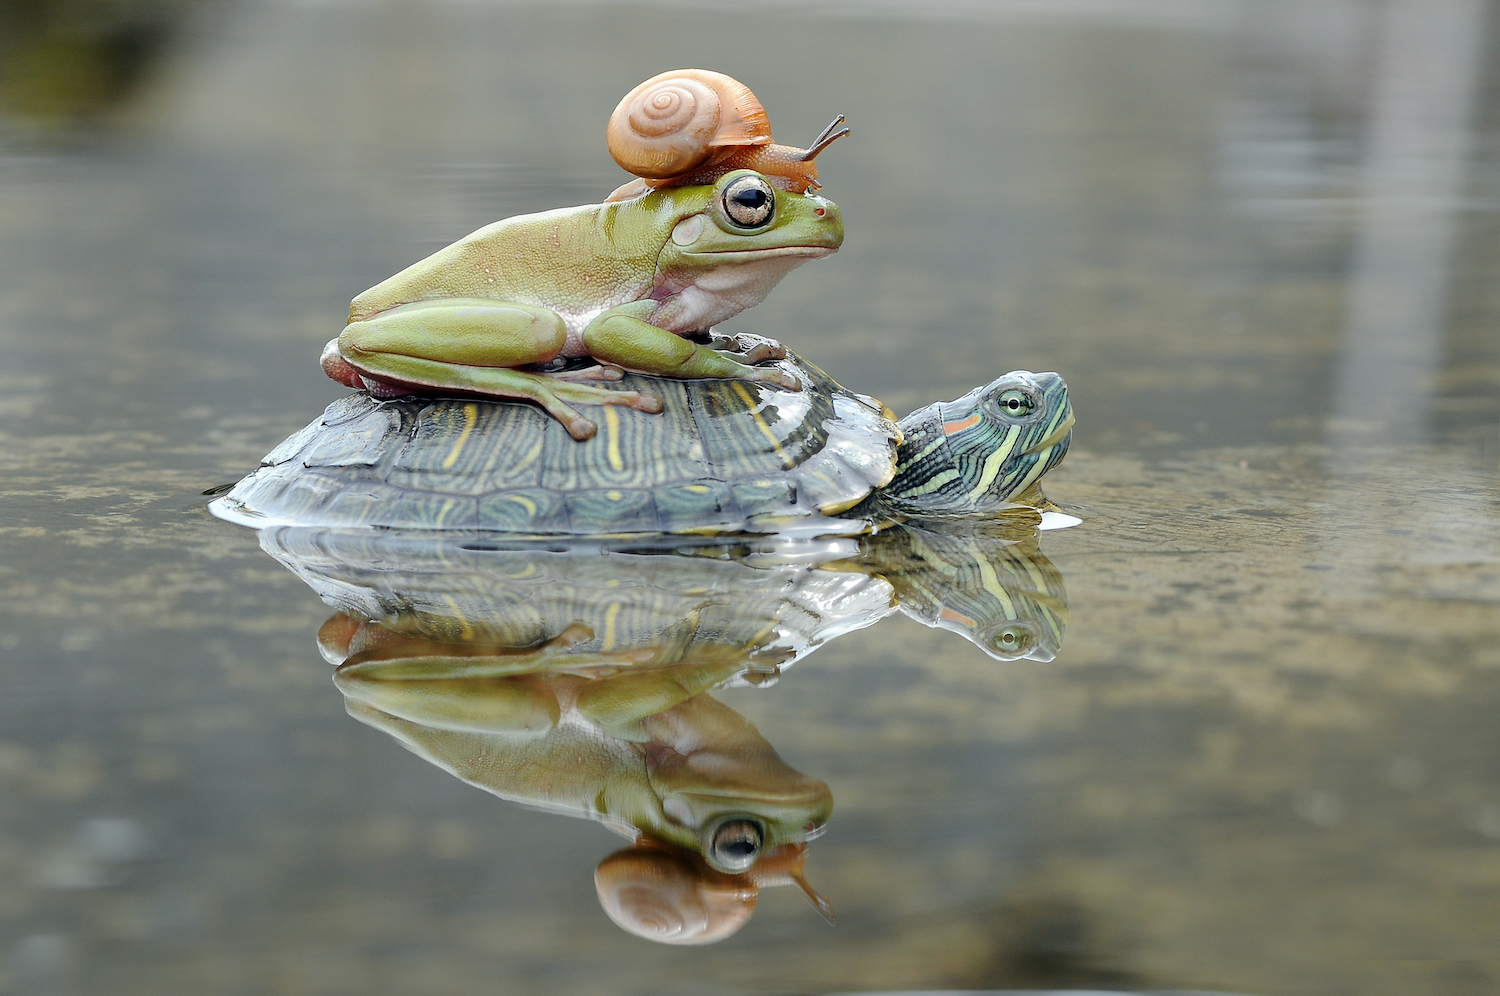 Frog and snail on a turtle, Indonesia